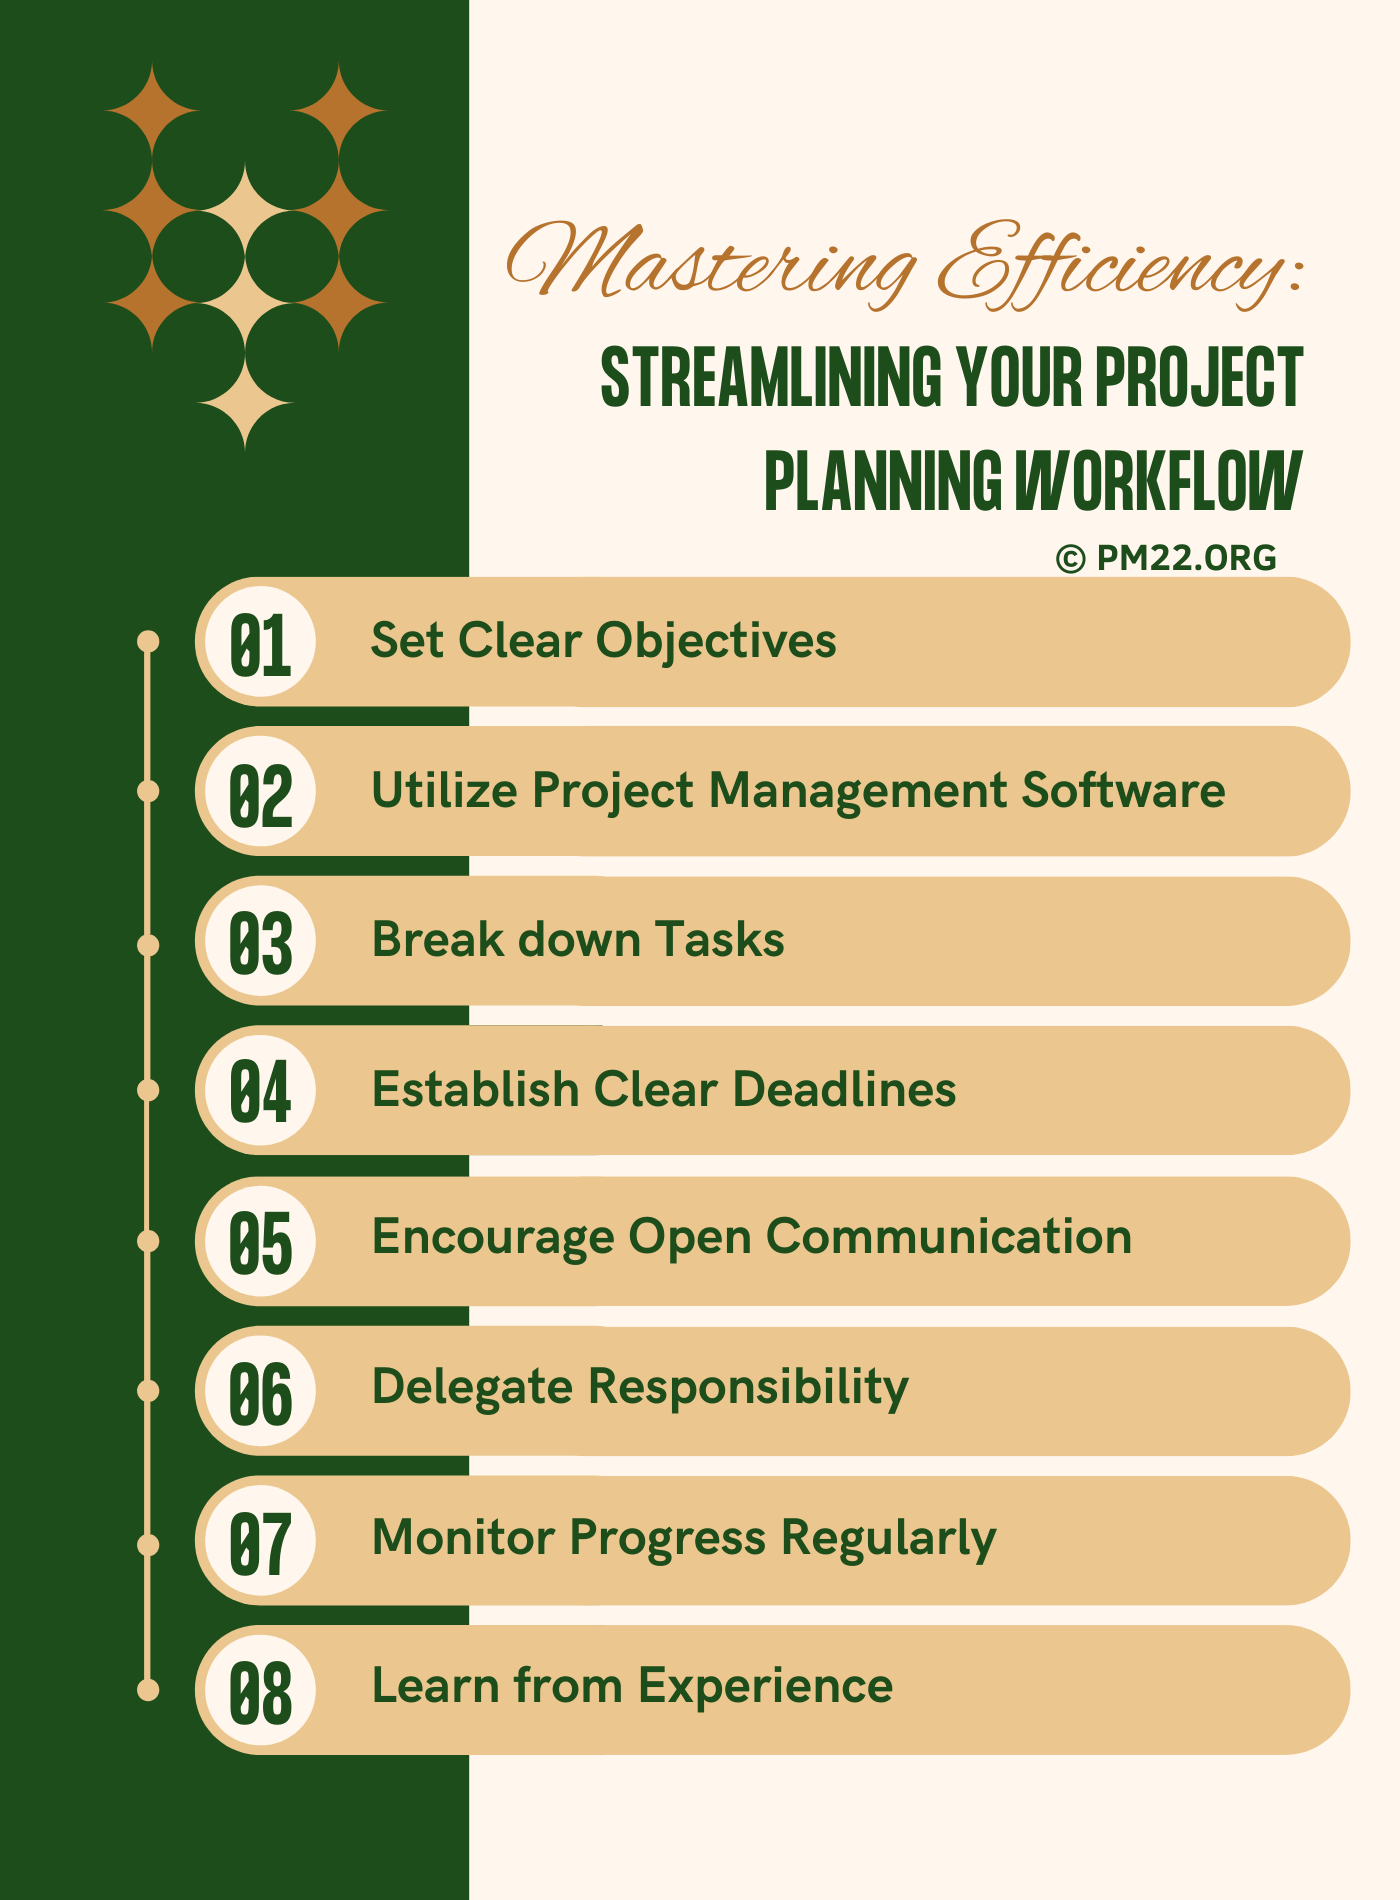 Mastering Efficiency: Streamlining Your Project Planning Workflow